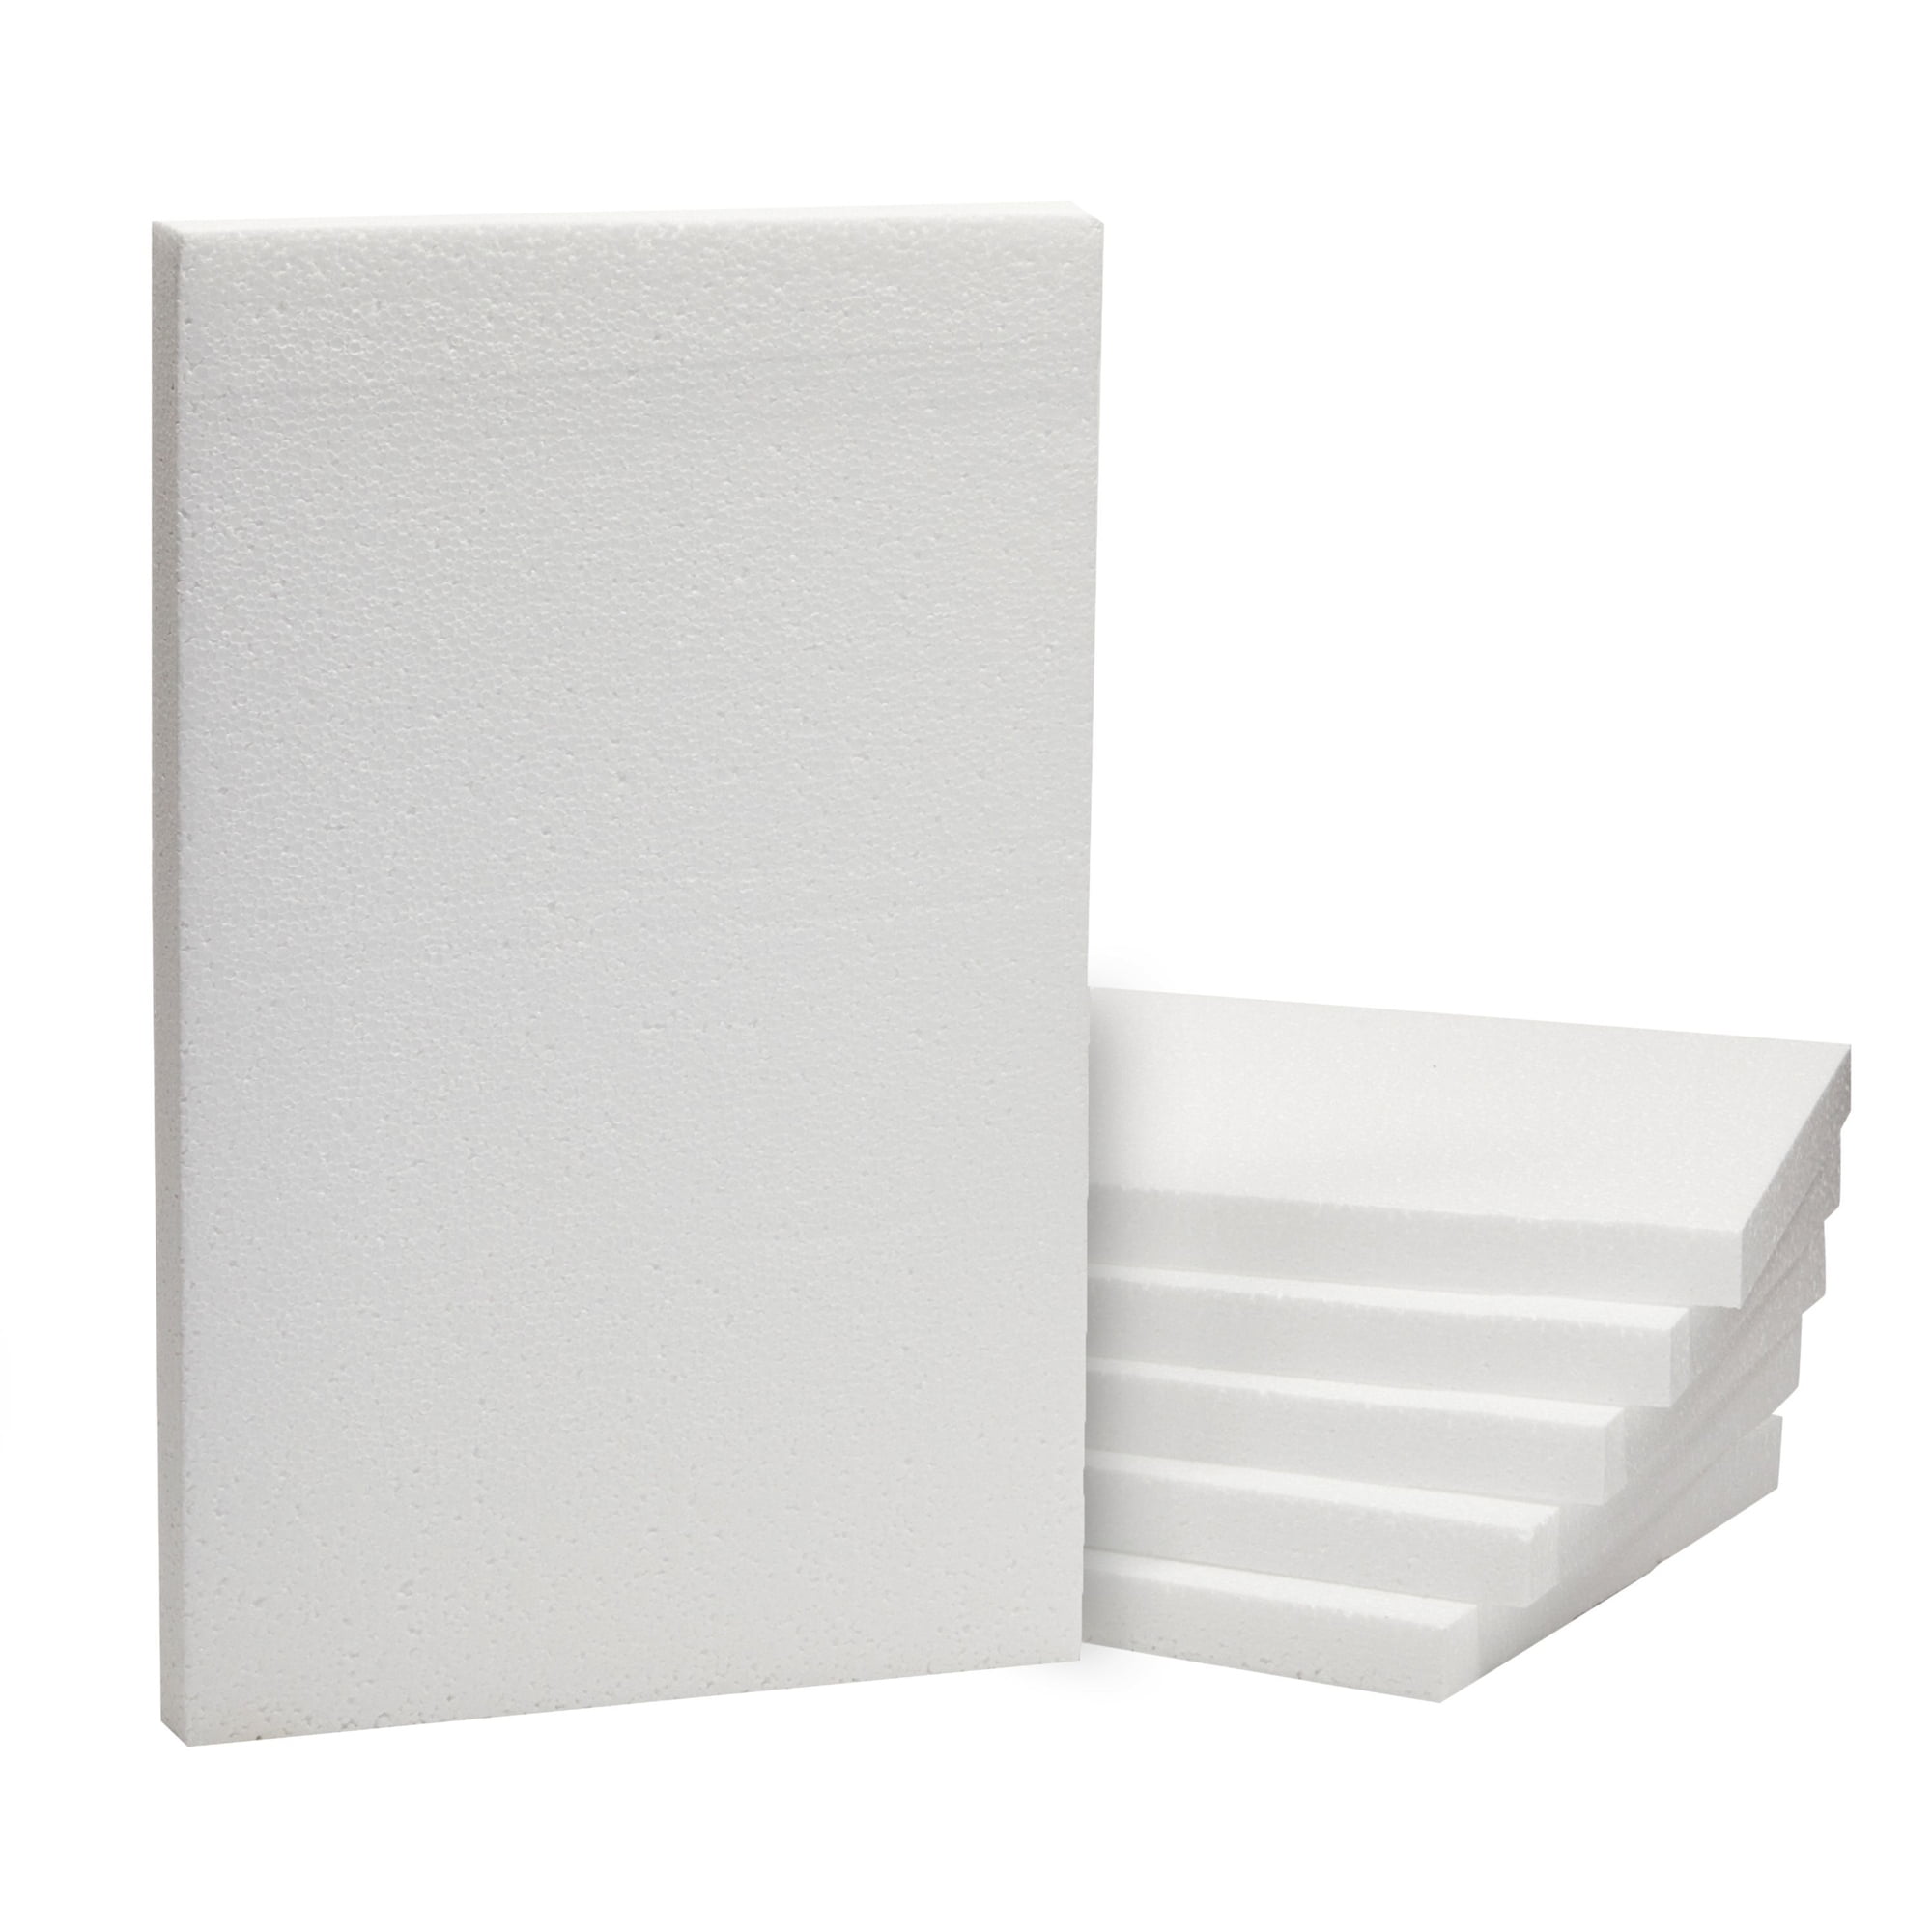 1 Inch Thick Foam Board Sheets - 6 Pack 17x11 Inch Polystyrene Rectangles  for DIY Crafts, Insulation, Sculptures, Models (White) 